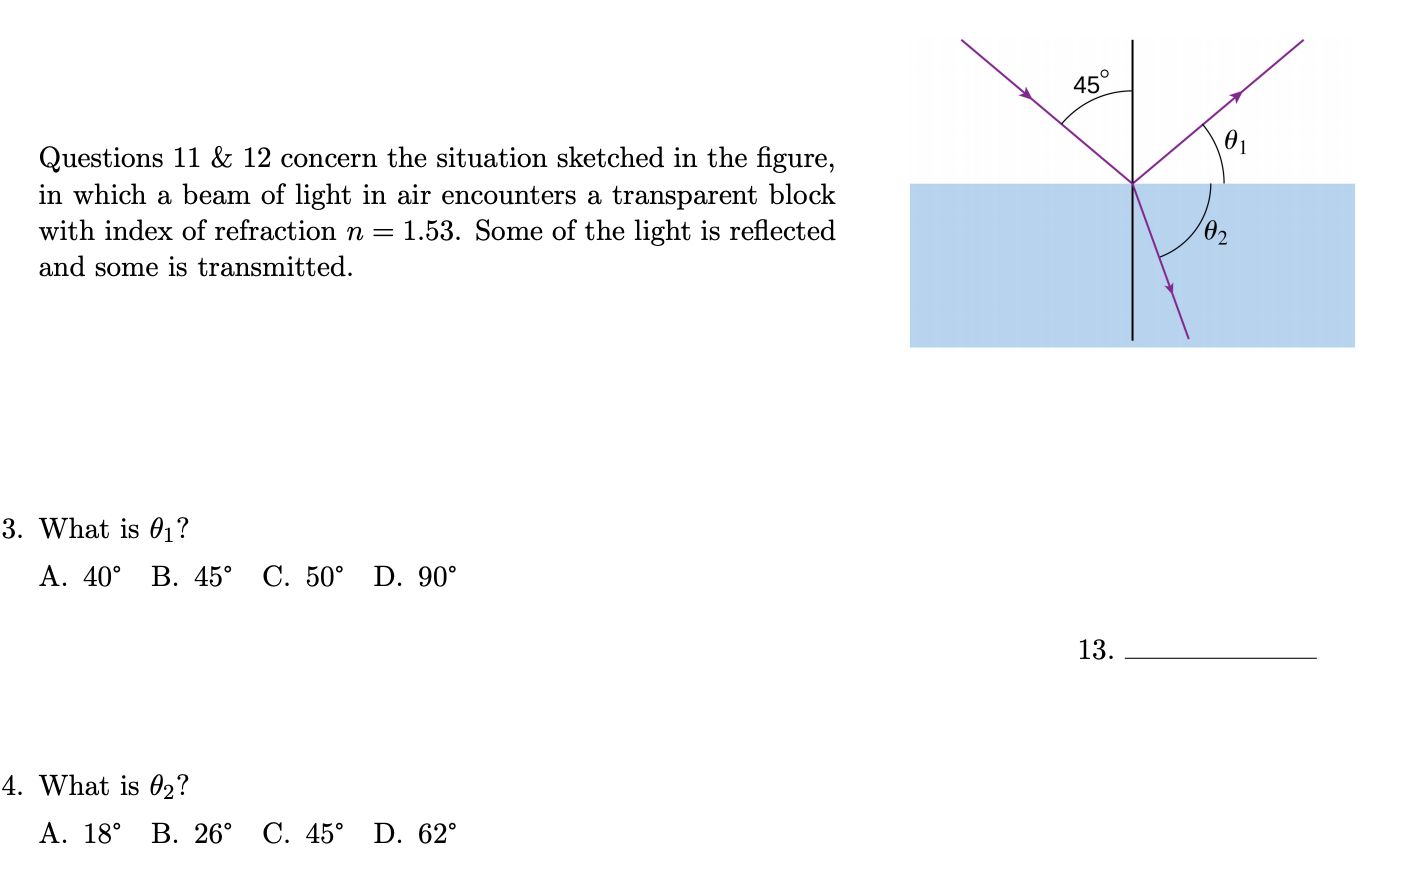 45°
Questions 11 & 12 concern the situation sketched in the figure,
in which a beam of light in air encounters a transparent block
with index of refraction n = 1.53. Some of the light is reflected
02
and some is transmitted.
B. What is 01?
Α. 40ο
B. 45° C. 50° D. 90°
13.
1. What is 02?
A. 18°
В. 26° С. 45°
D. 62°
